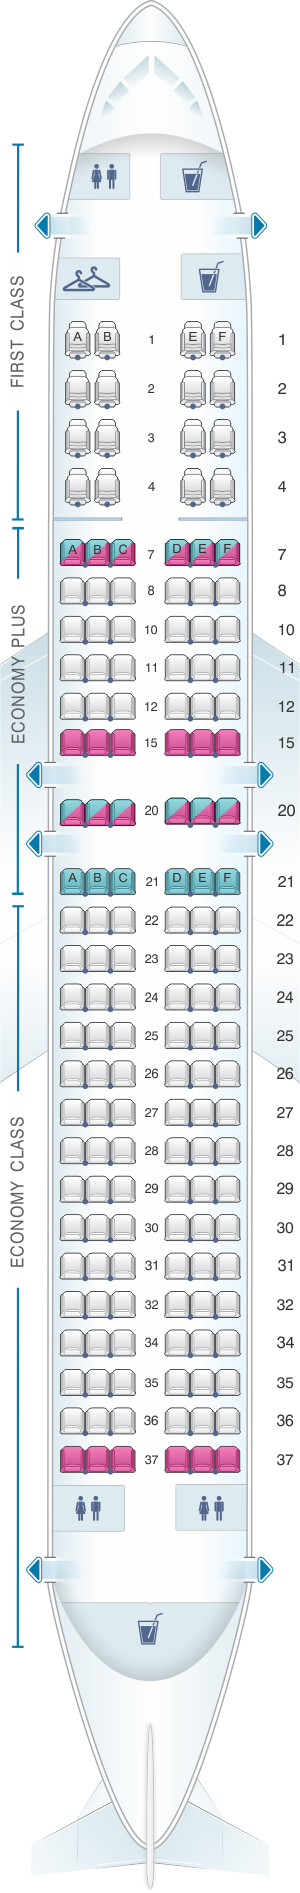 Seat map for United Airlines Boeing B737 800 - version 1